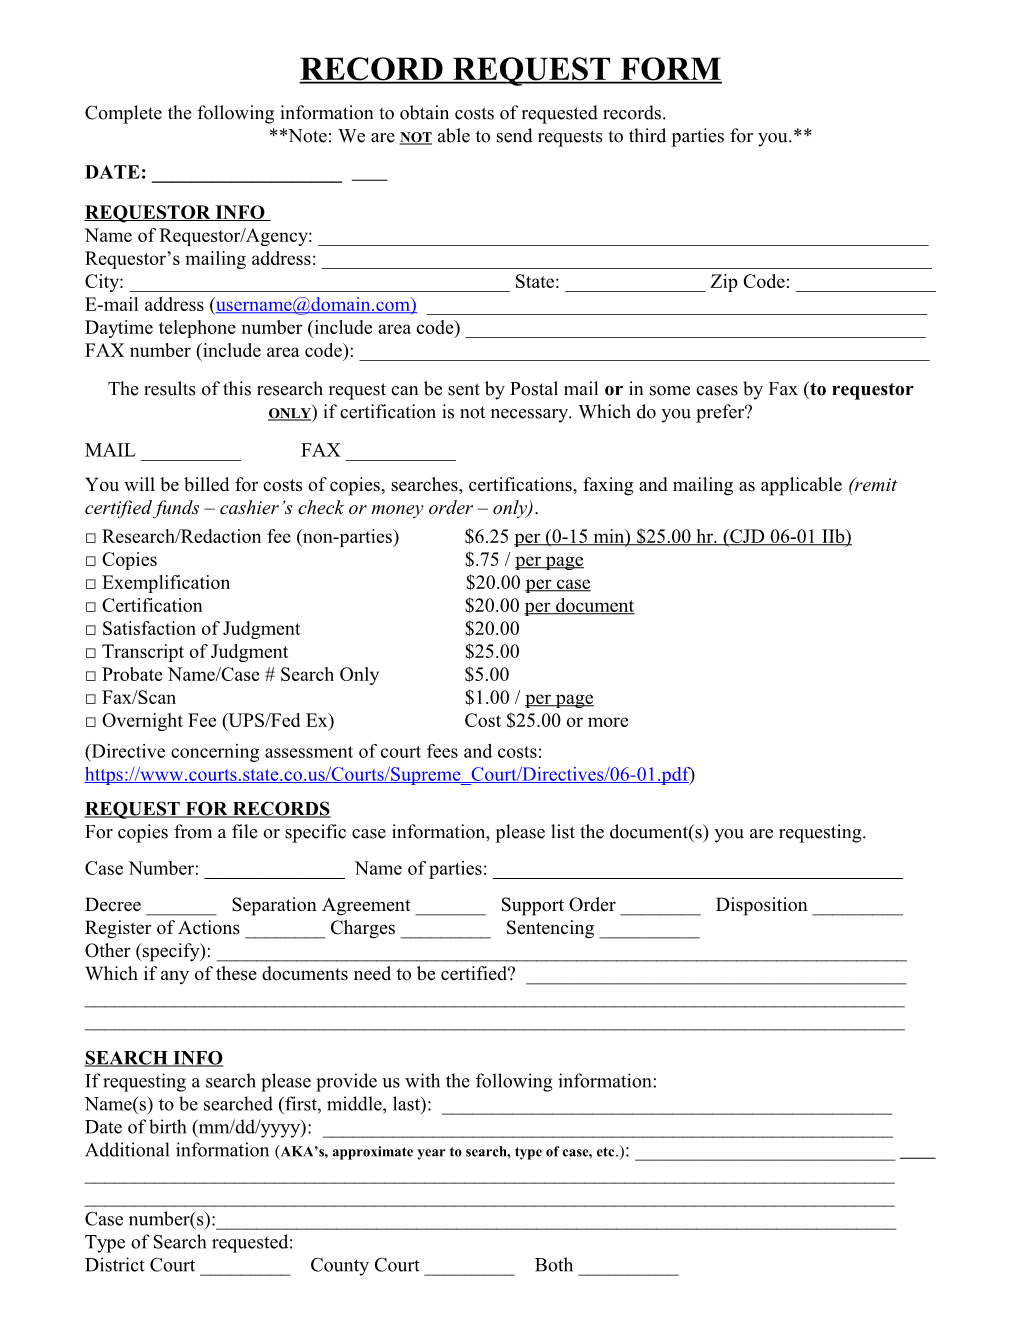 Record Request Form